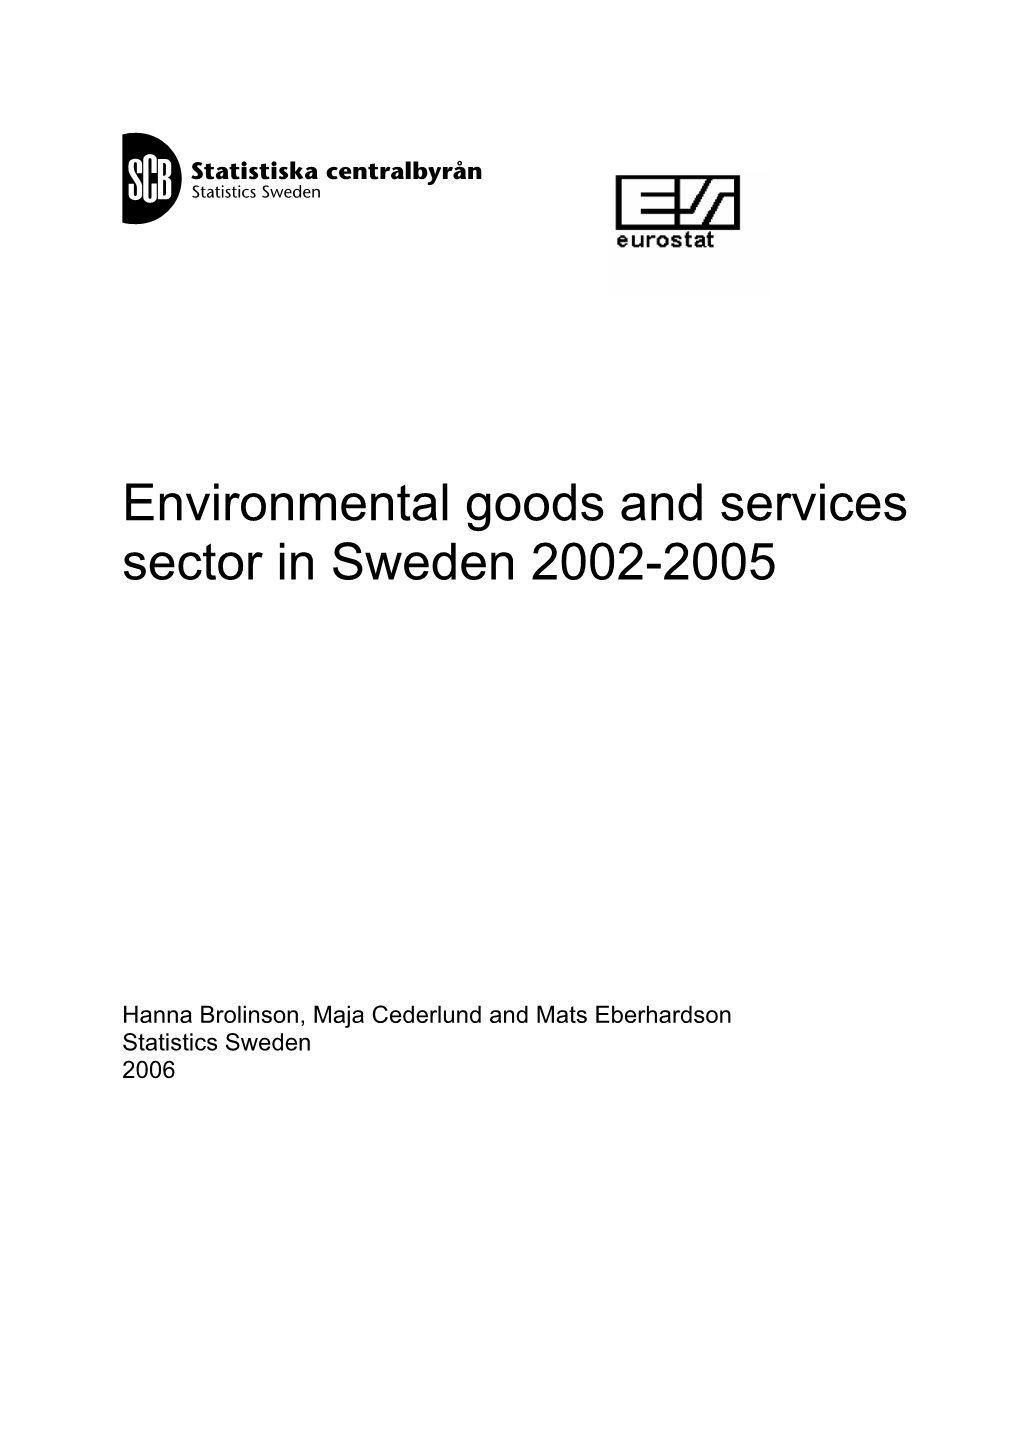 Environmental Goods and Services Sector in Sweden 2002-2005